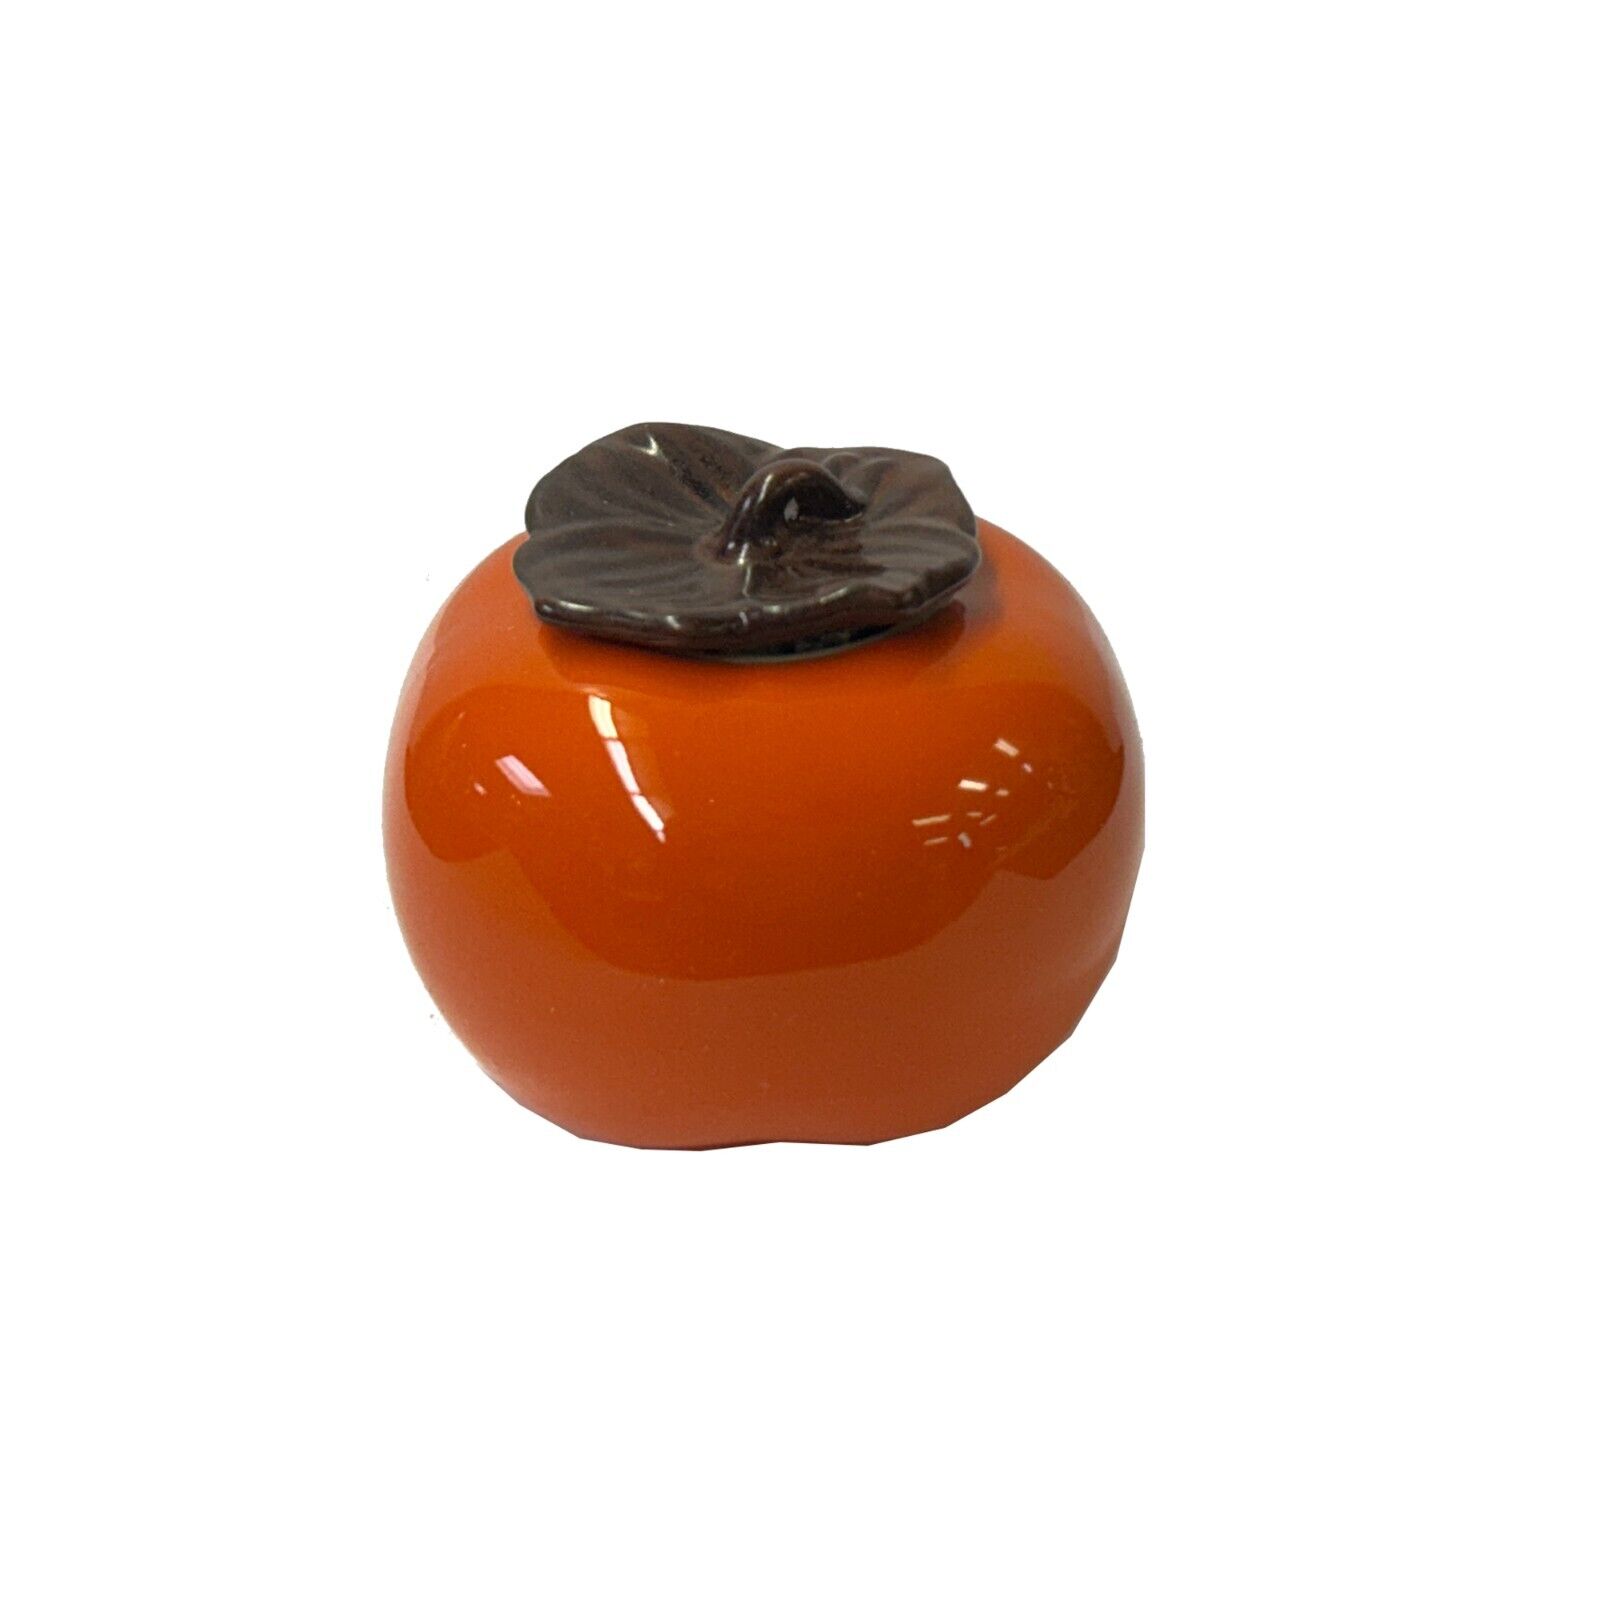 Chinese Orange Ceramic Small Persimmon Shape Display Lid Container ws3580